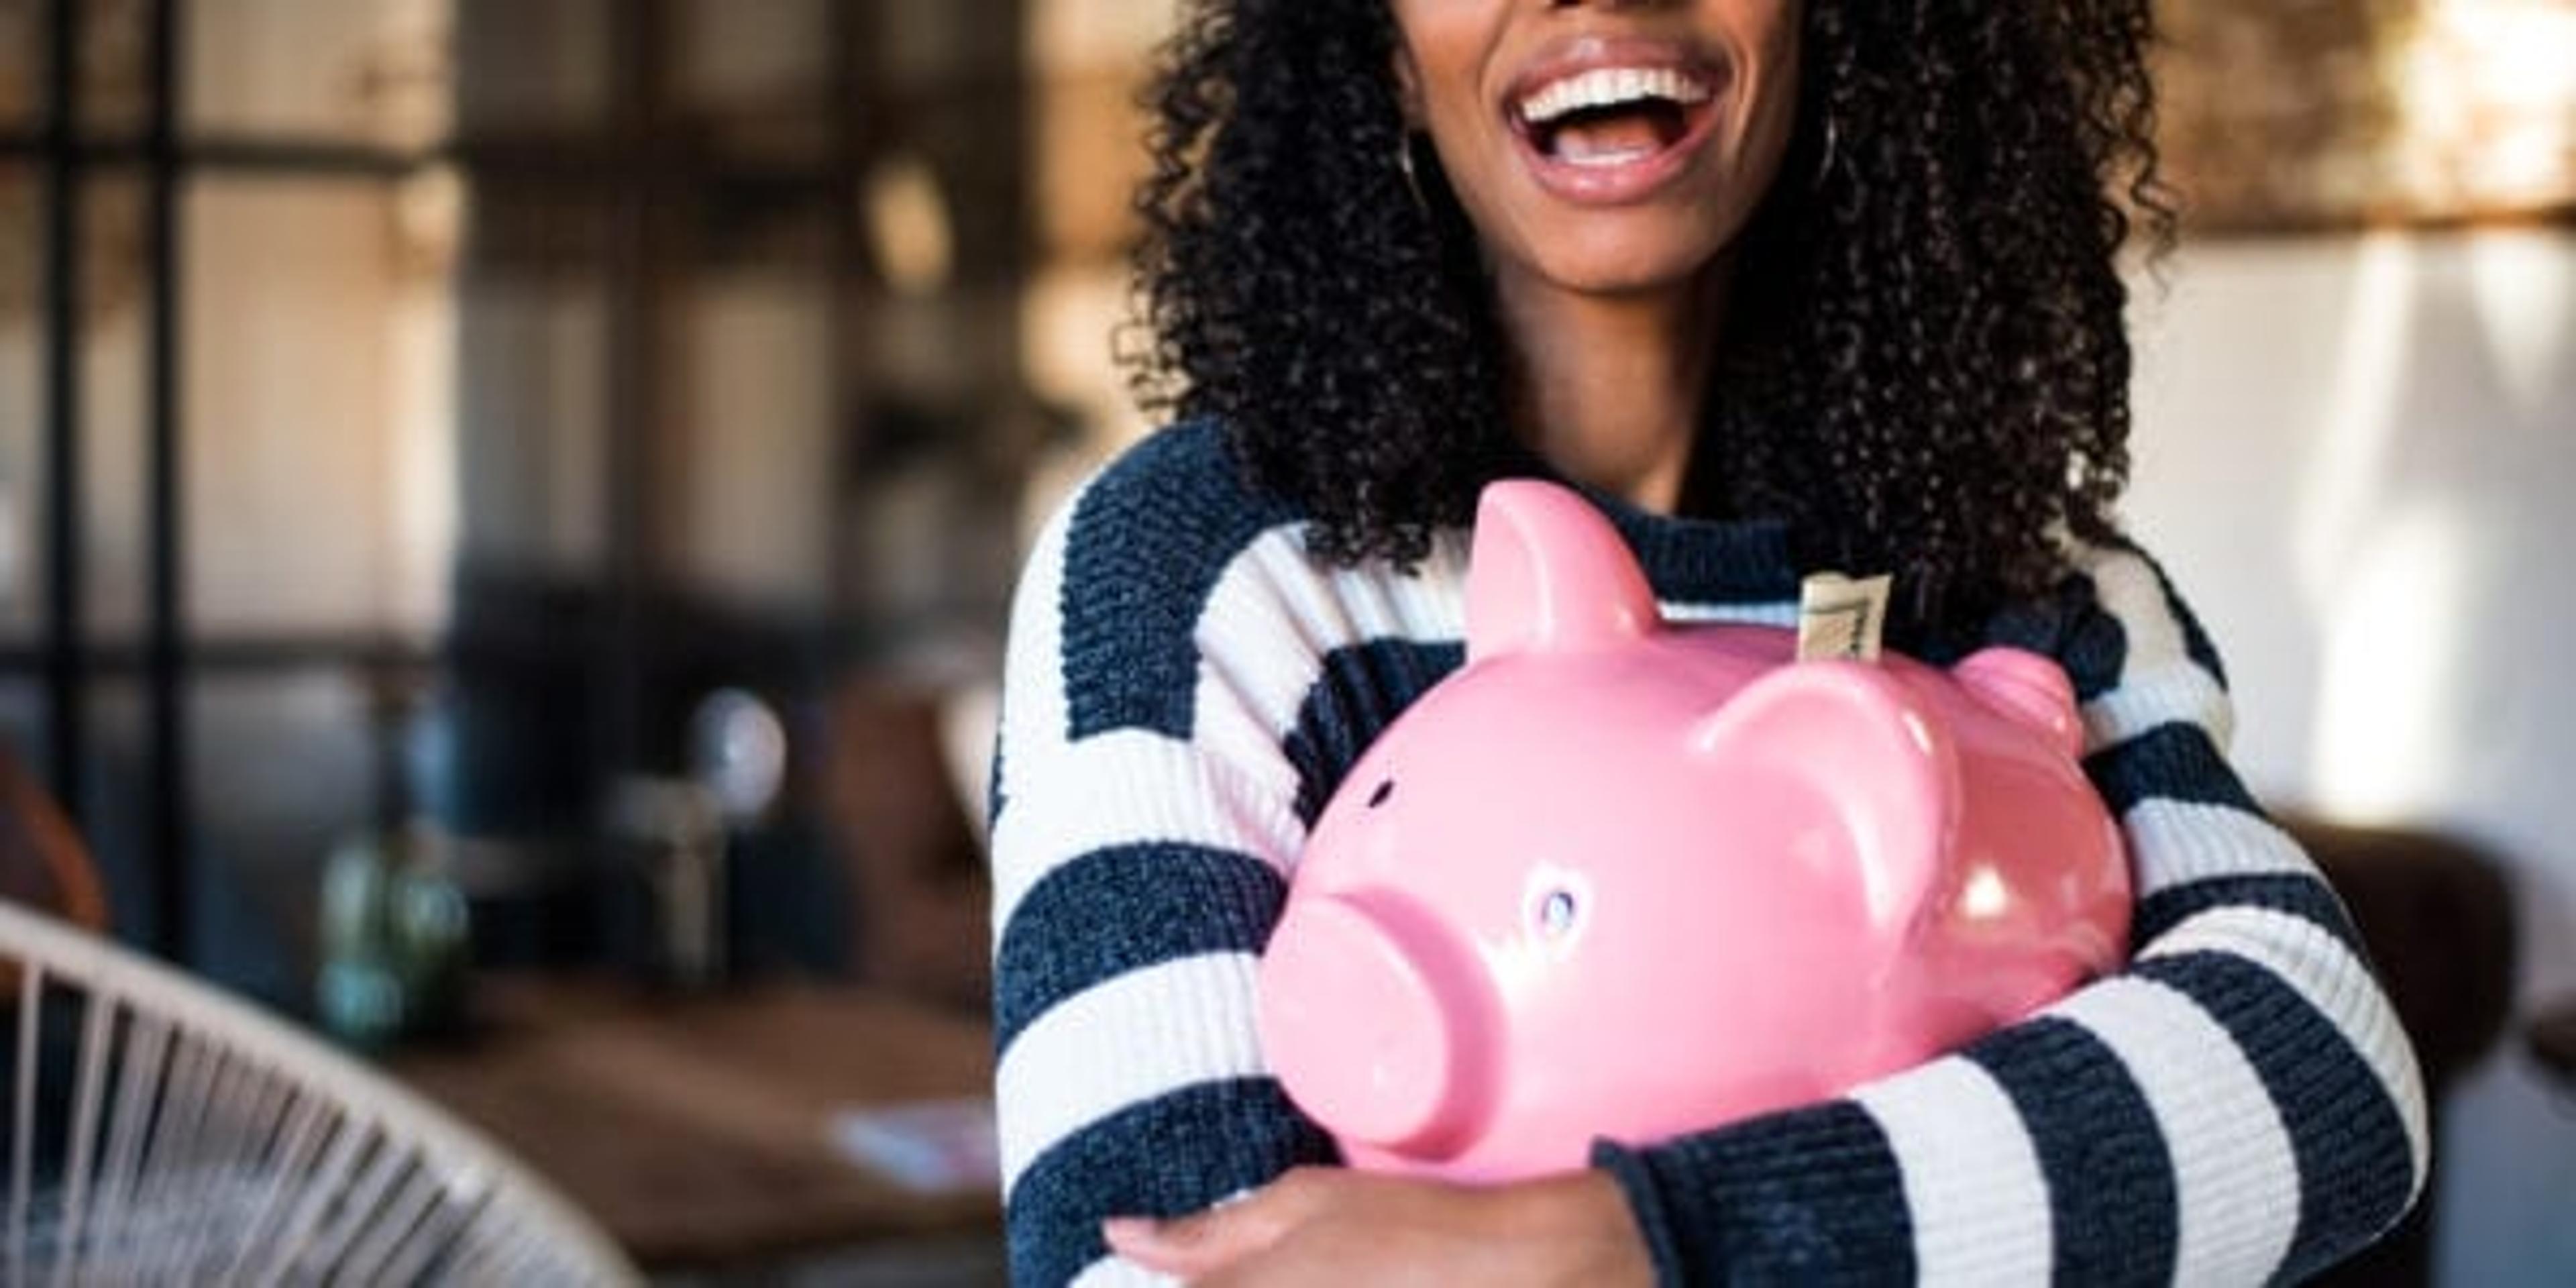 Black young woman hugging her pink piggy bank